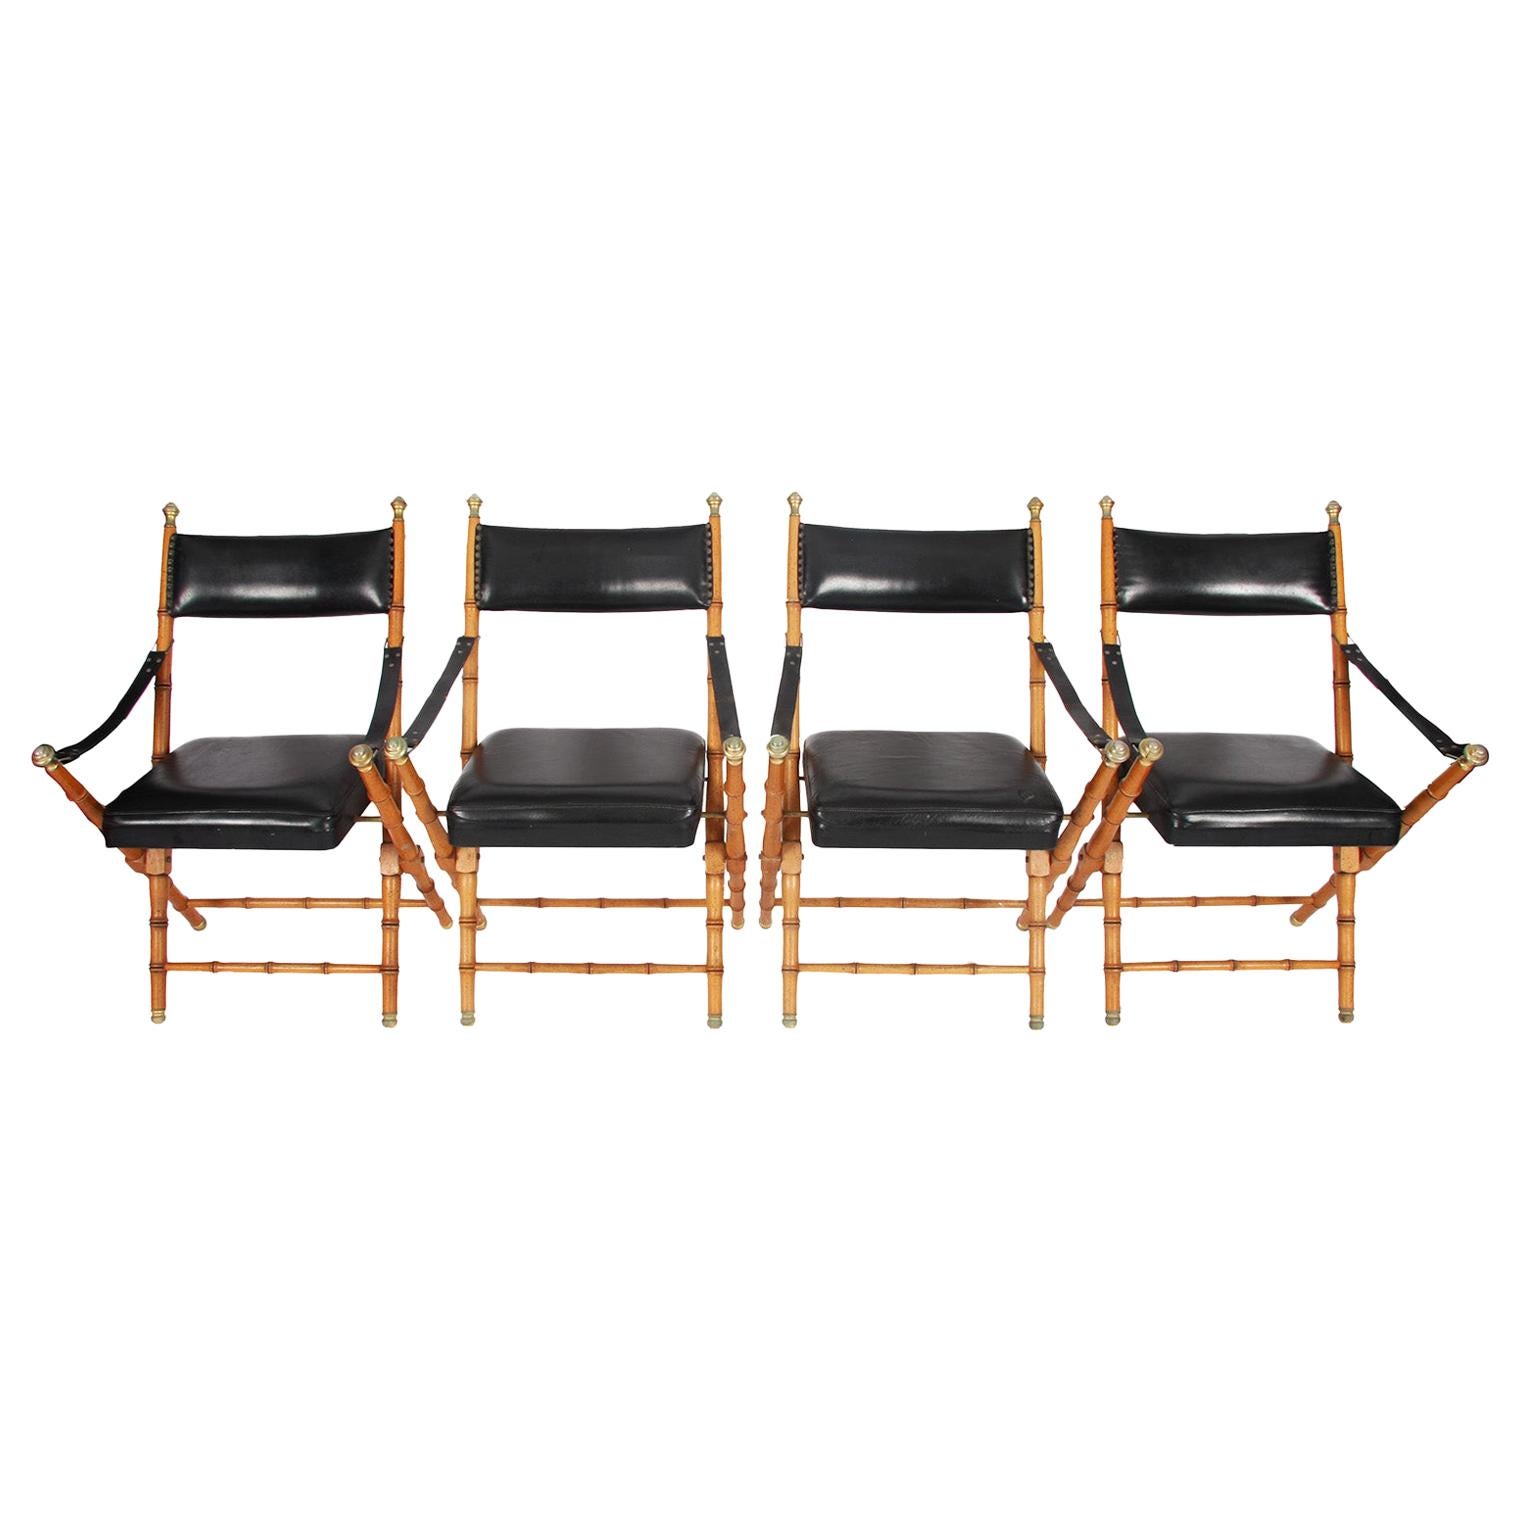 Vintage 1970s French Set of Four Leather & Faux Bamboo Folding Chairs